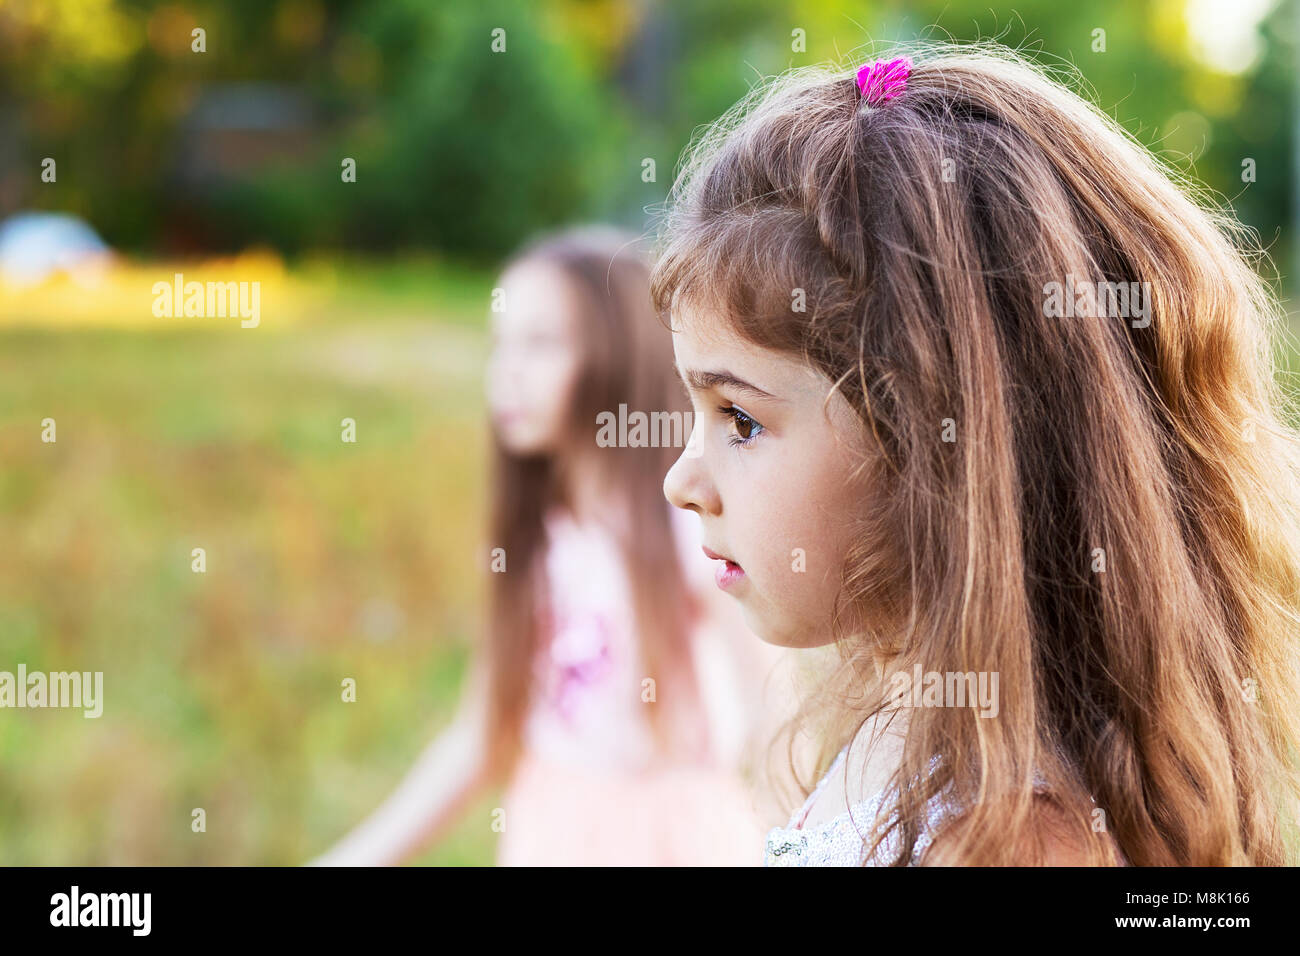 Beautiful little girl with long curly hair, looking worried at summer day.  Place for text Stock Photo